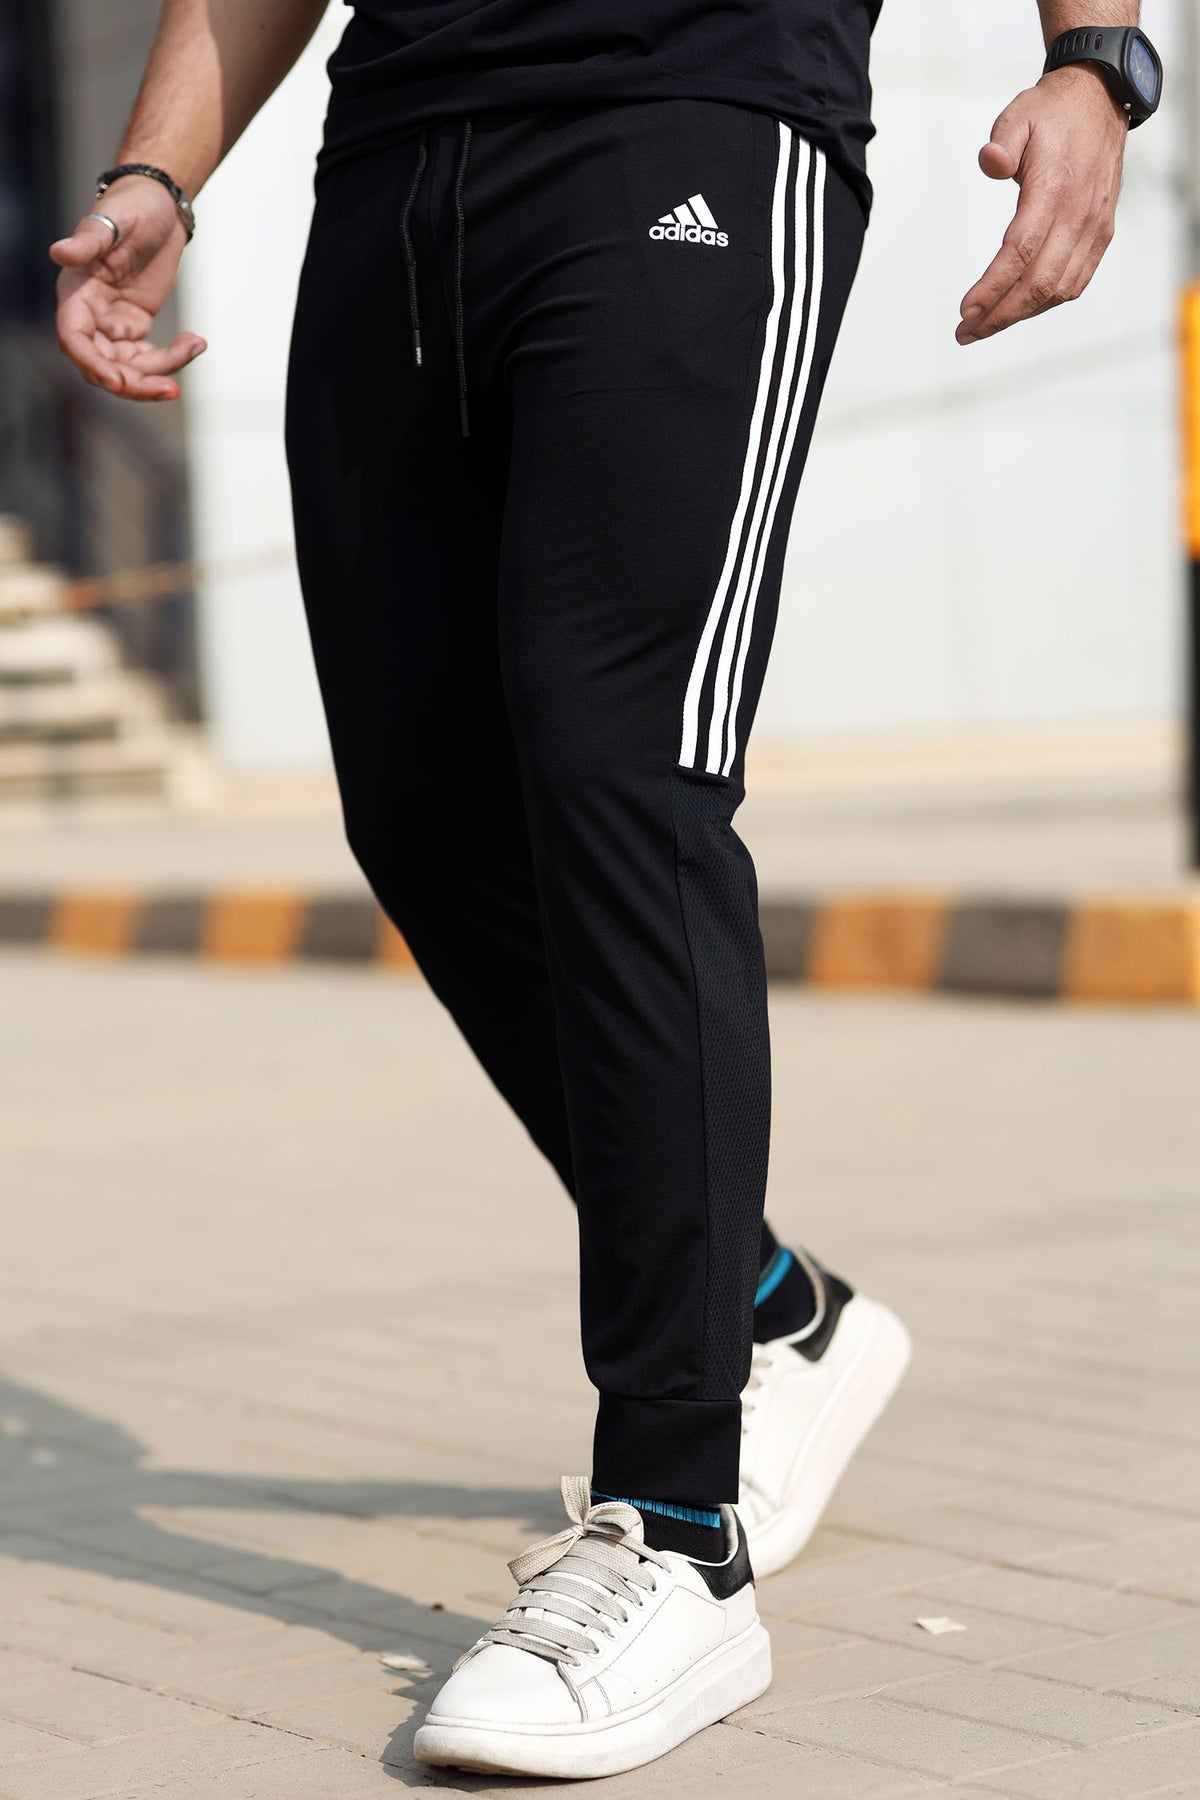 Adds Logo With Side Stripes Men Training Trouser